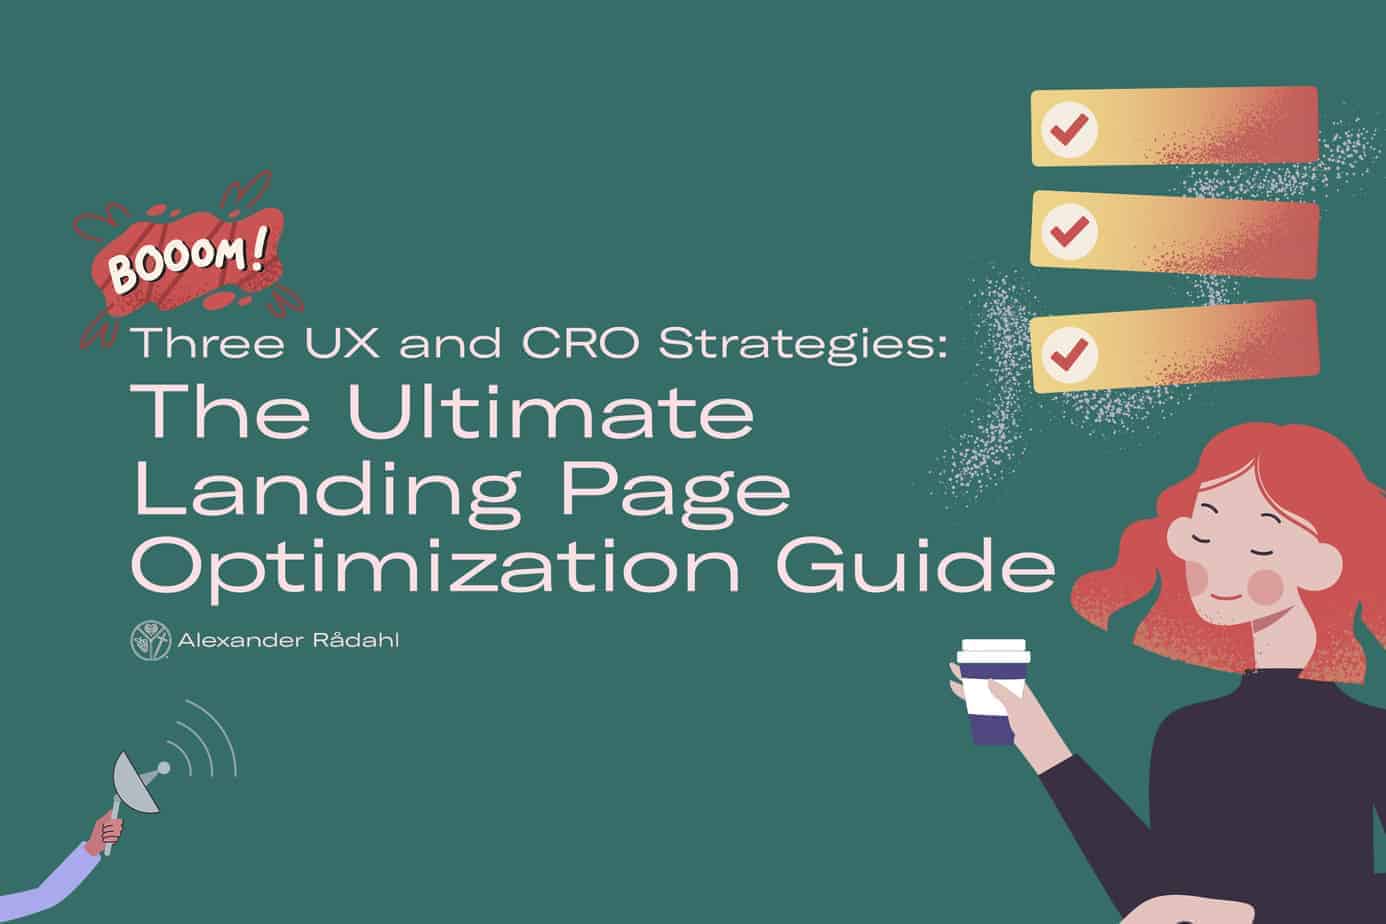 The ultimate landing page optimization guide: 3 ux and conversion rate optimization strategies